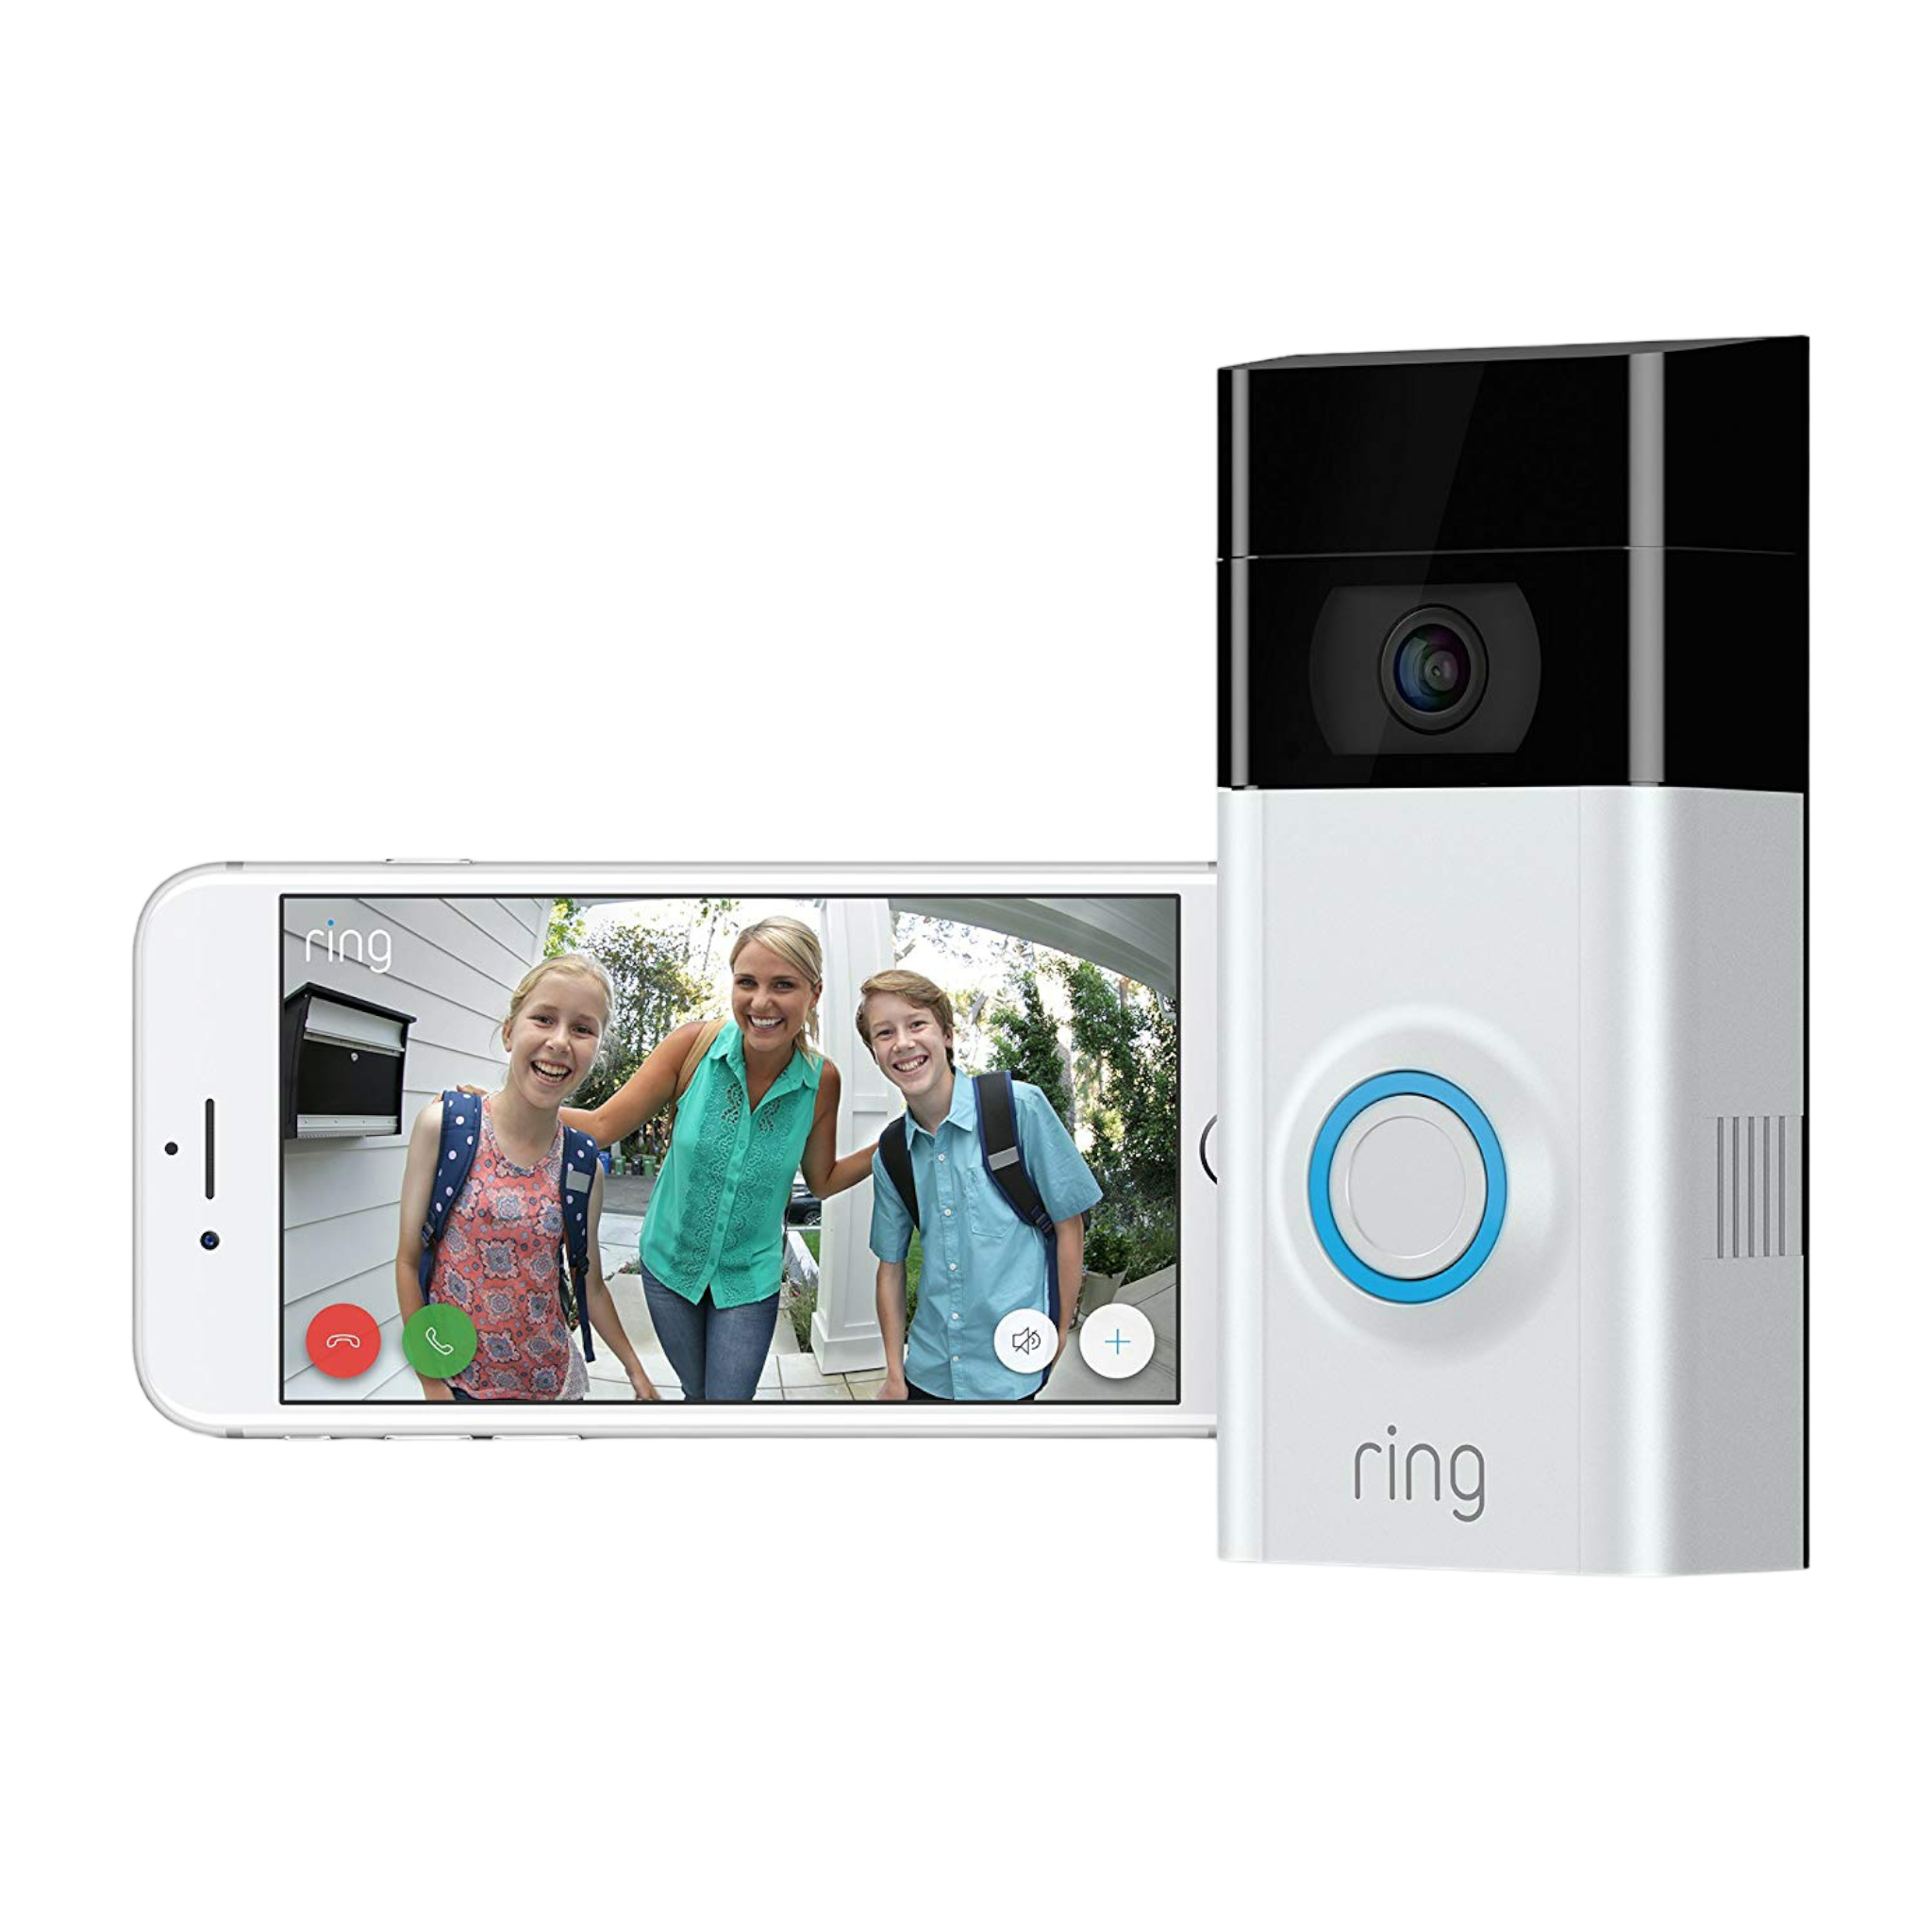 Refurbished Ring Video Doorbell 2 - HD 1080P Wireless Camera with Night Vision & Installation Tools - Pro-Distributing